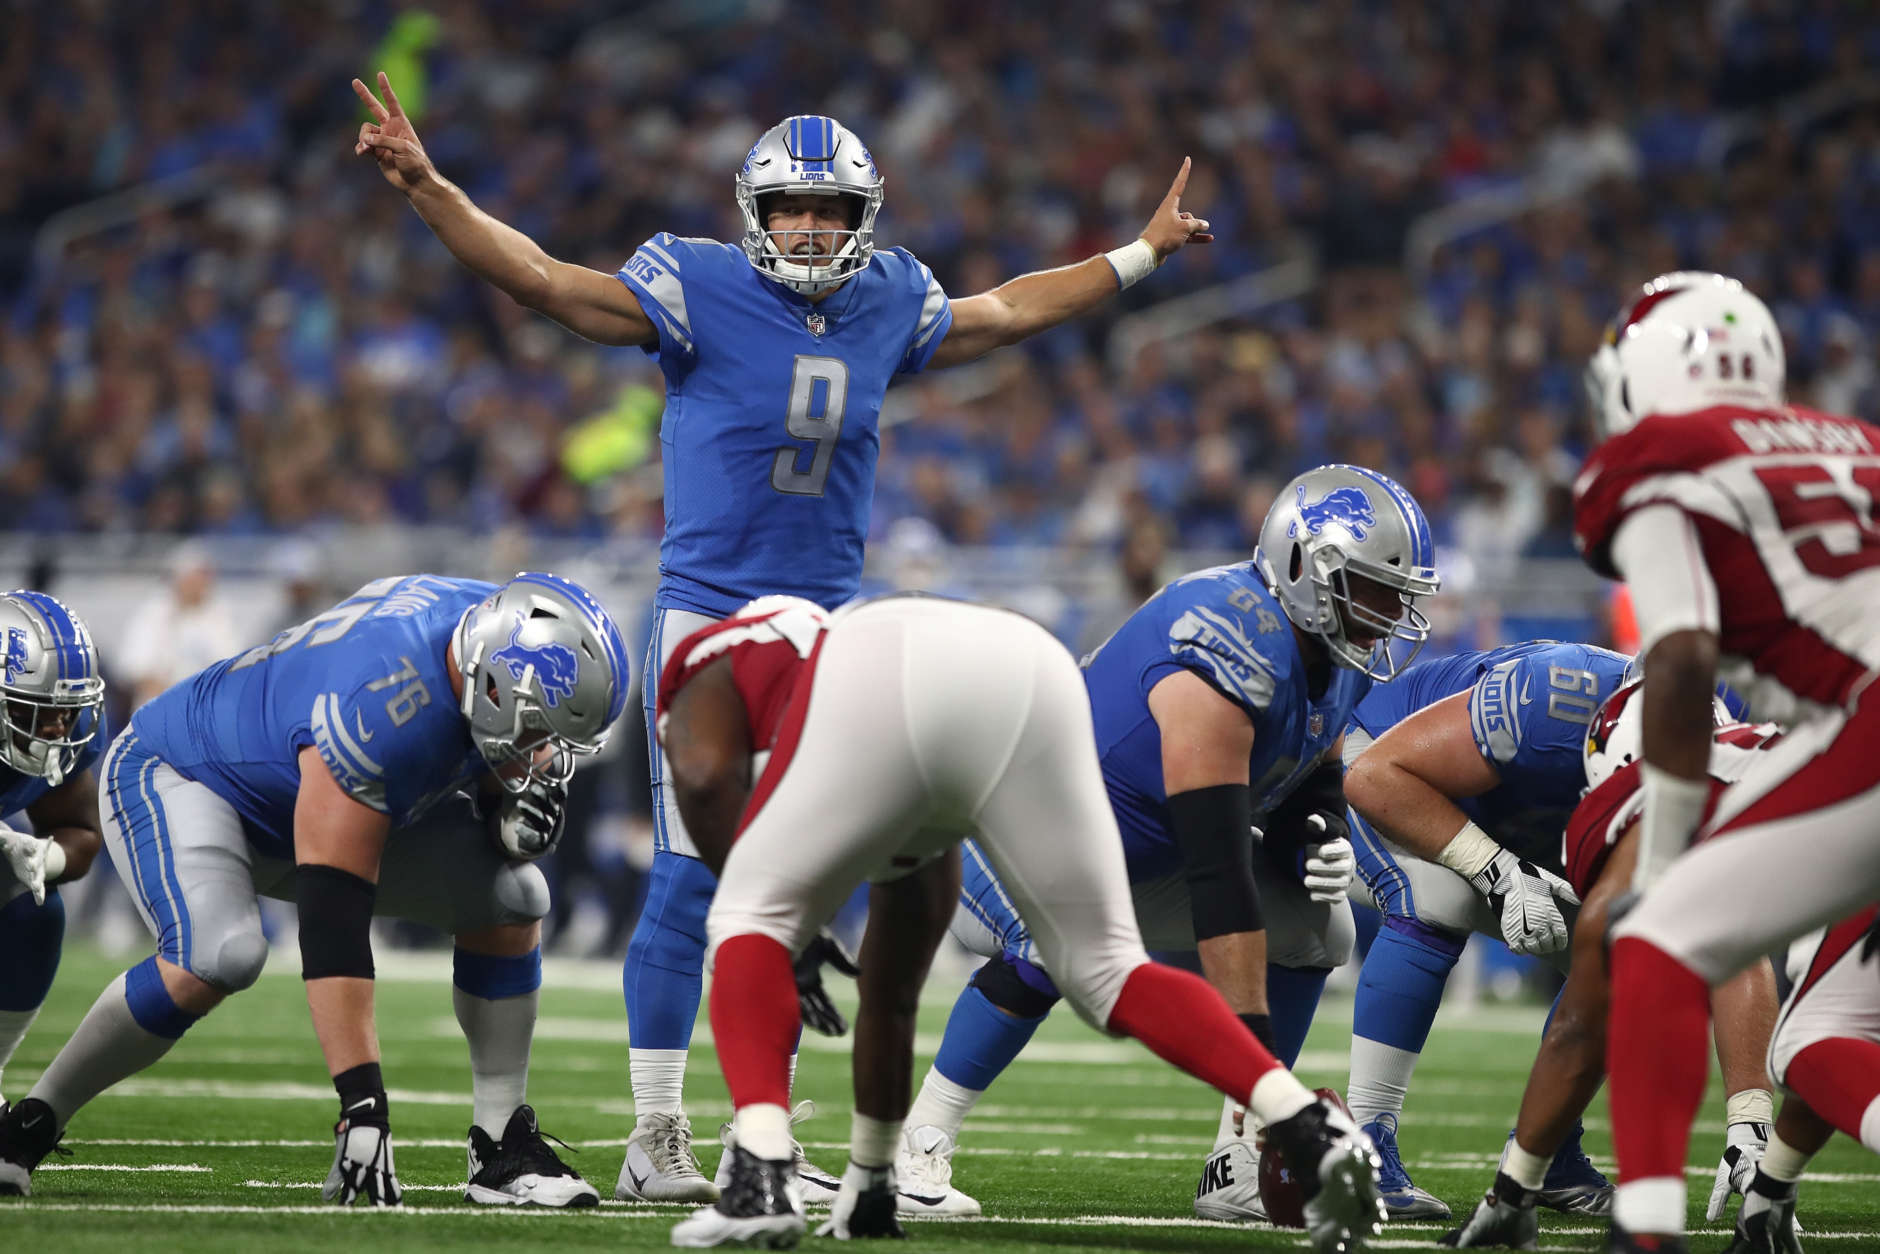 DETROIT, MI - SEPTEMBER 10: Matthew Stafford #9 of the Detroit Lions calls a play in the first half in the against the Arizona Cardinals at Ford Field on September 10, 2017 in Detroit, Michigan. (Photo by Gregory Shamus/Getty Images)